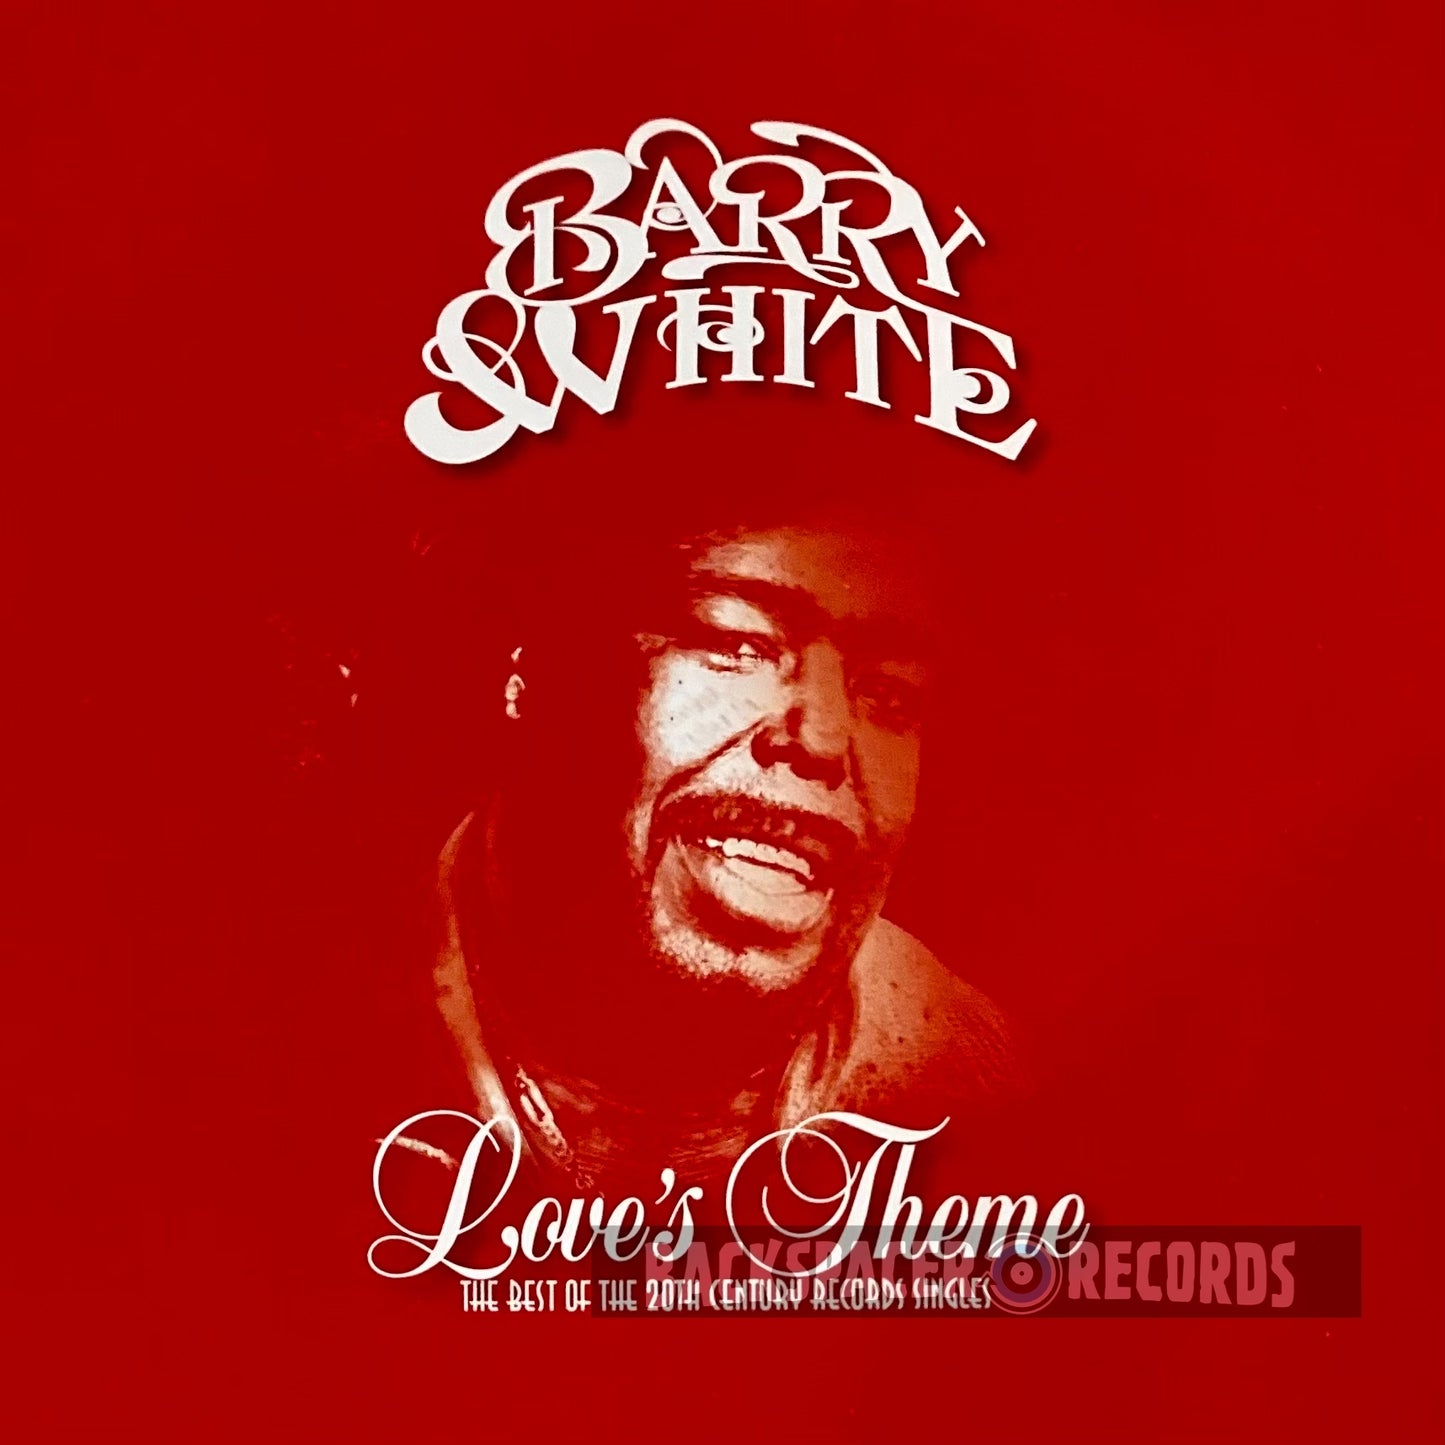 Barry White - Love's Theme: The Best Of The 20th Century Records Singles 2-LP (Sealed)